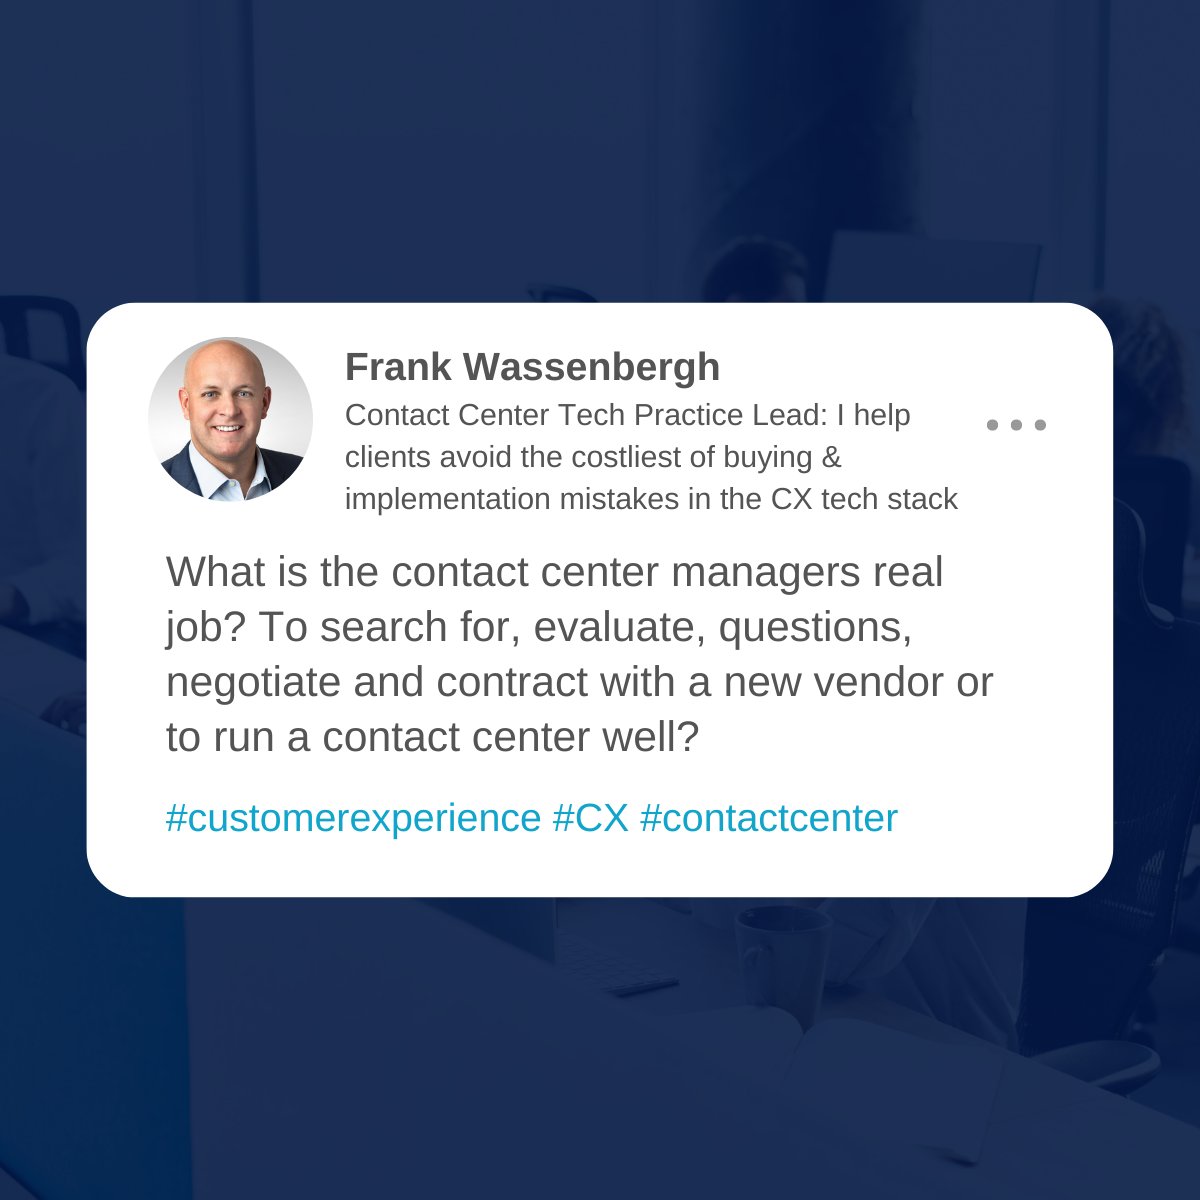 Share your thoughts in the comments! #cx #contactcenter #customerexperience